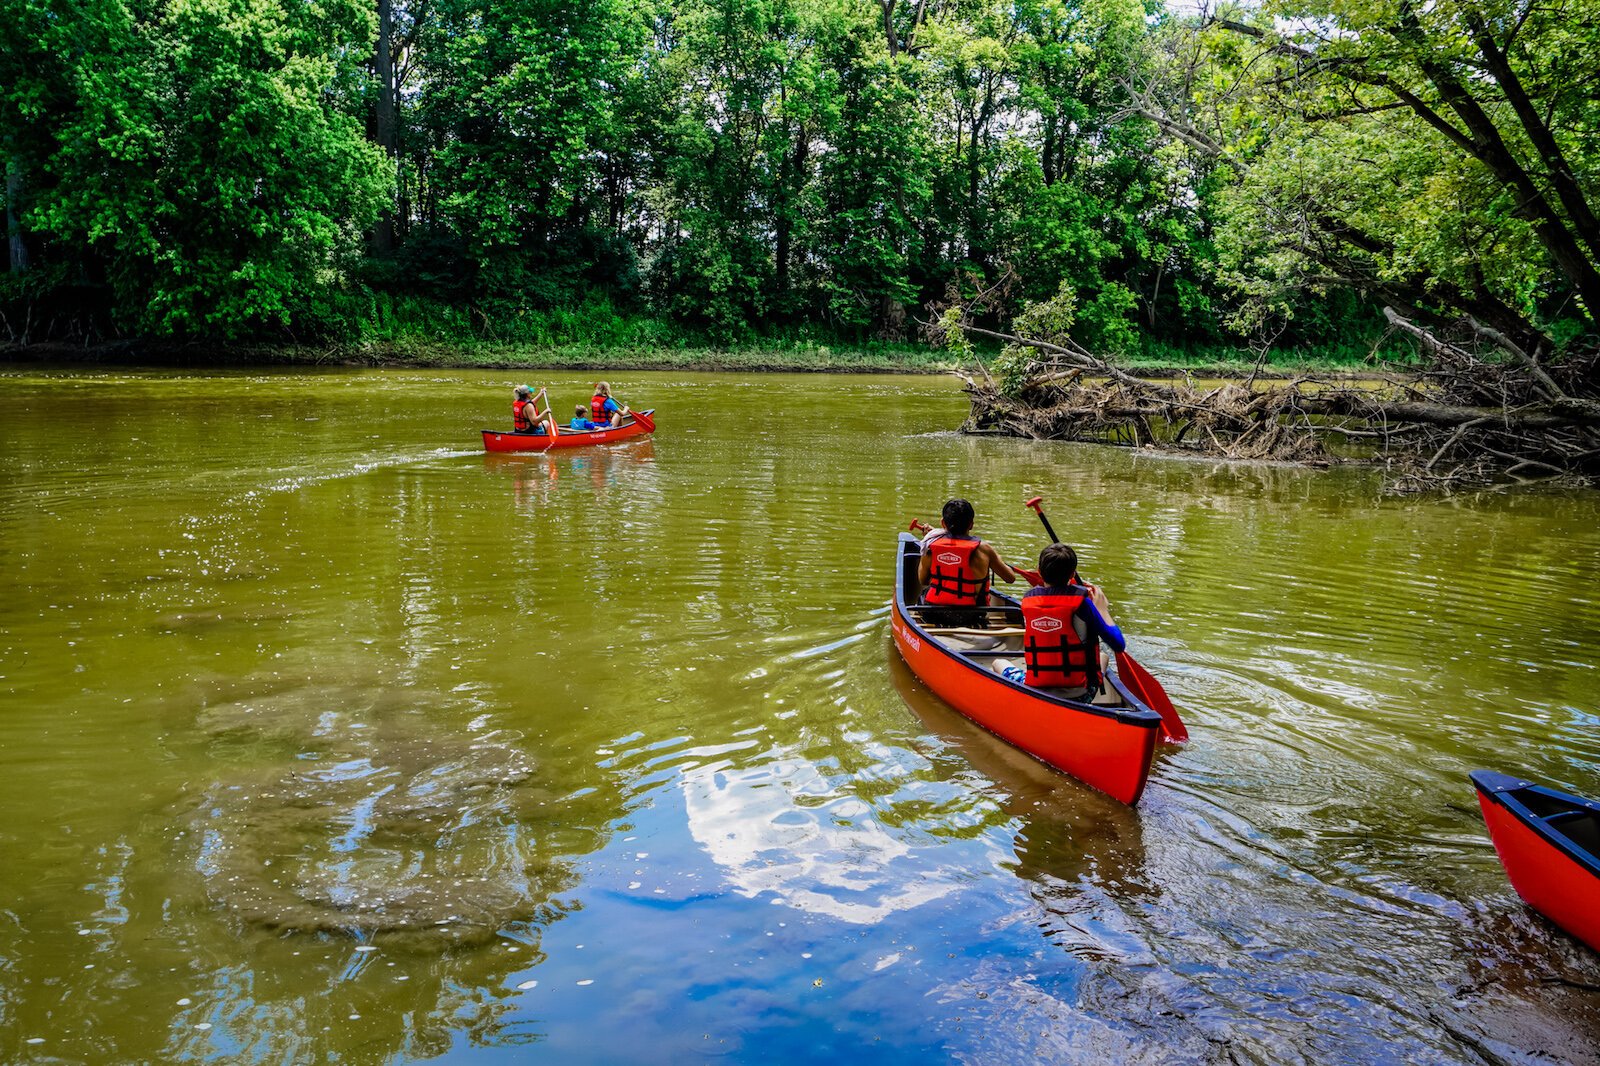 Wabash County is home to both the Eel and Wabash Rivers, and both are perfect for canoeing and kayaking.